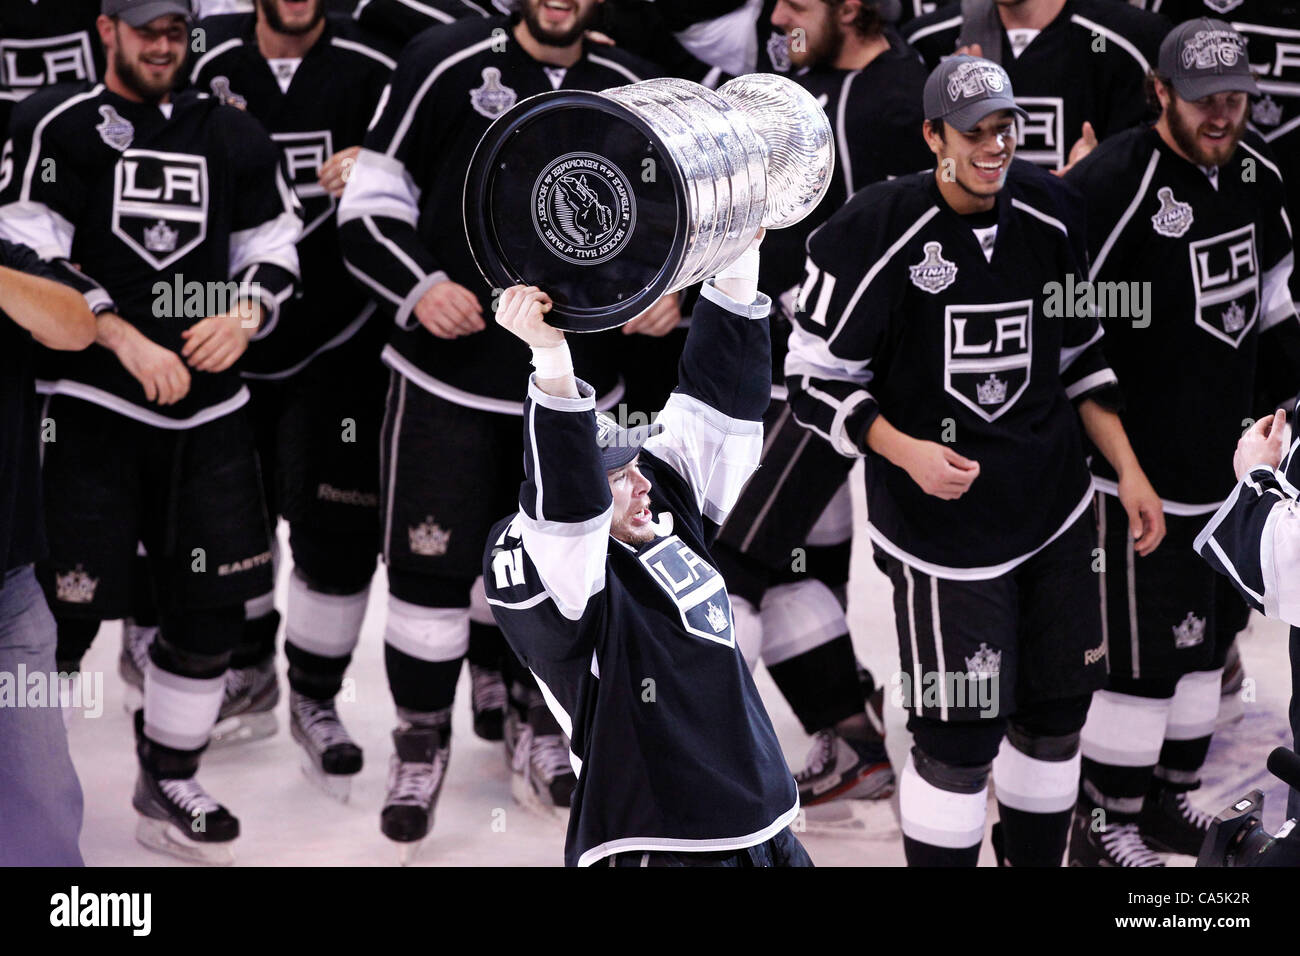 11.06.2012.Los Angeles Staples Center, USA. Los Angeles Kings right wing  forward #23 Dustin Brown C (USA) celebrates with the Stanley Cup The LA  Kings won the game 6-1 to win the Stanly